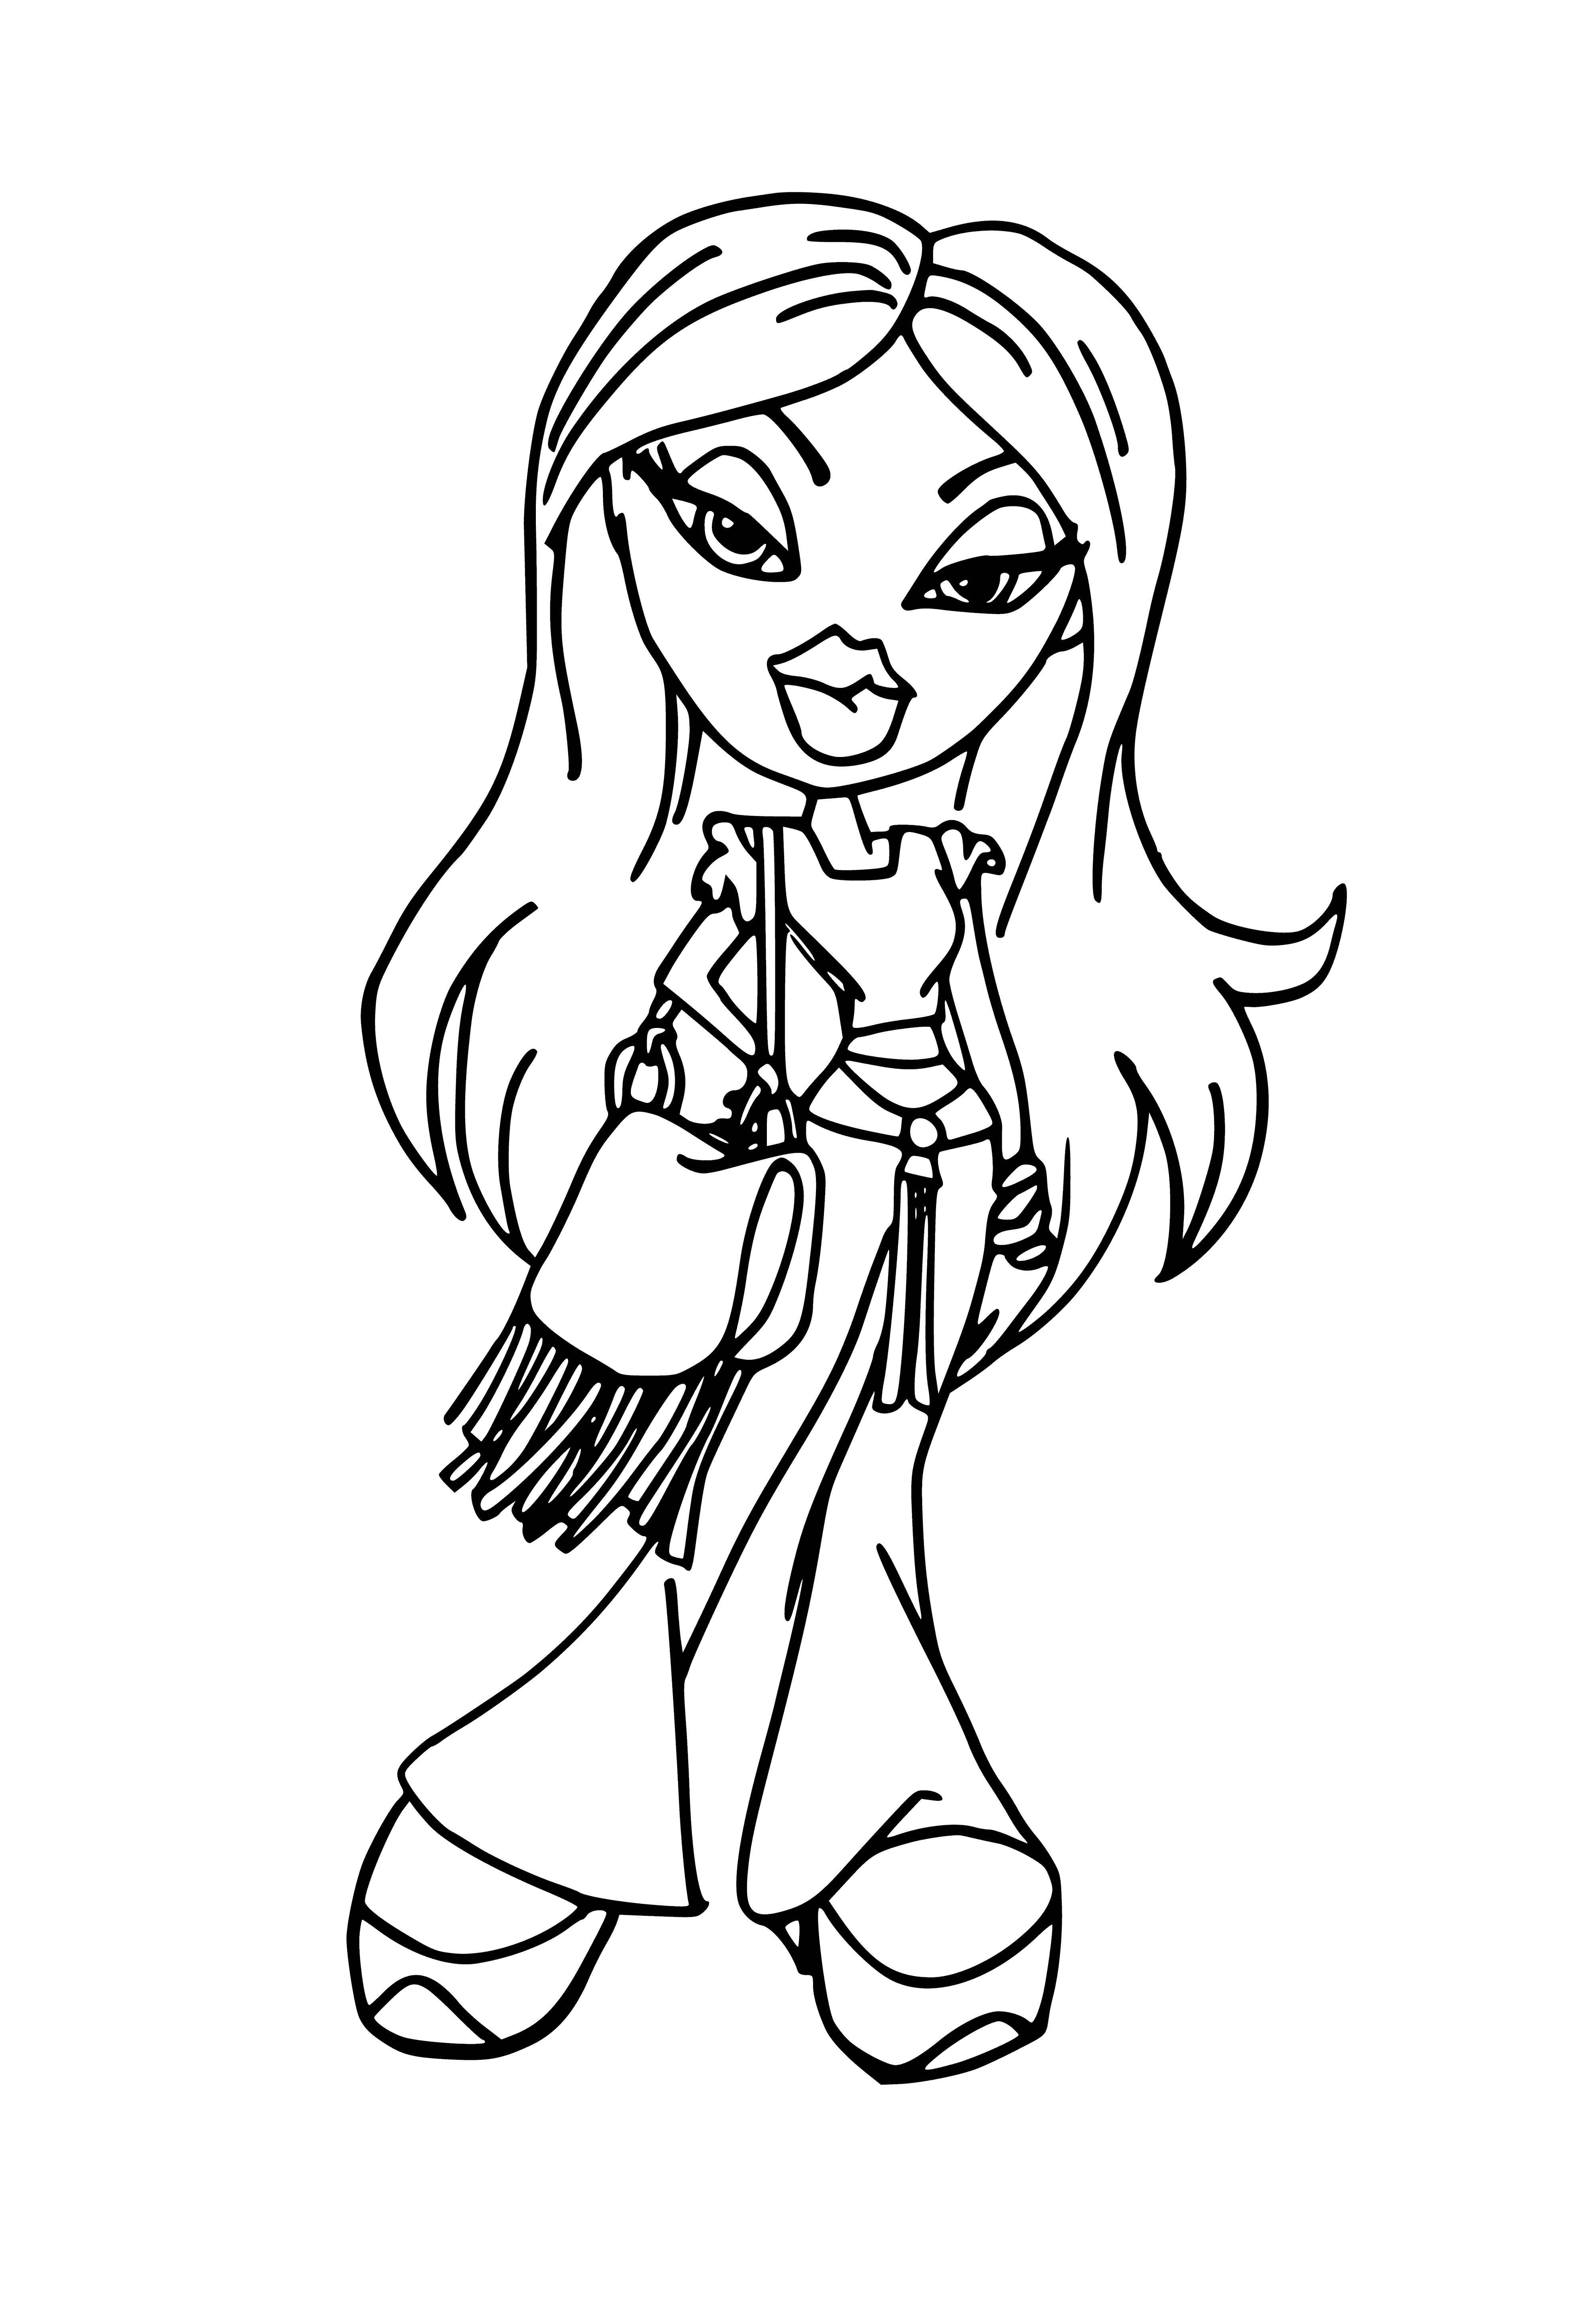 coloring page: Bratz dolls are four best friends with unique looks & styles, shown with happy smiles & an embrace. #friendship